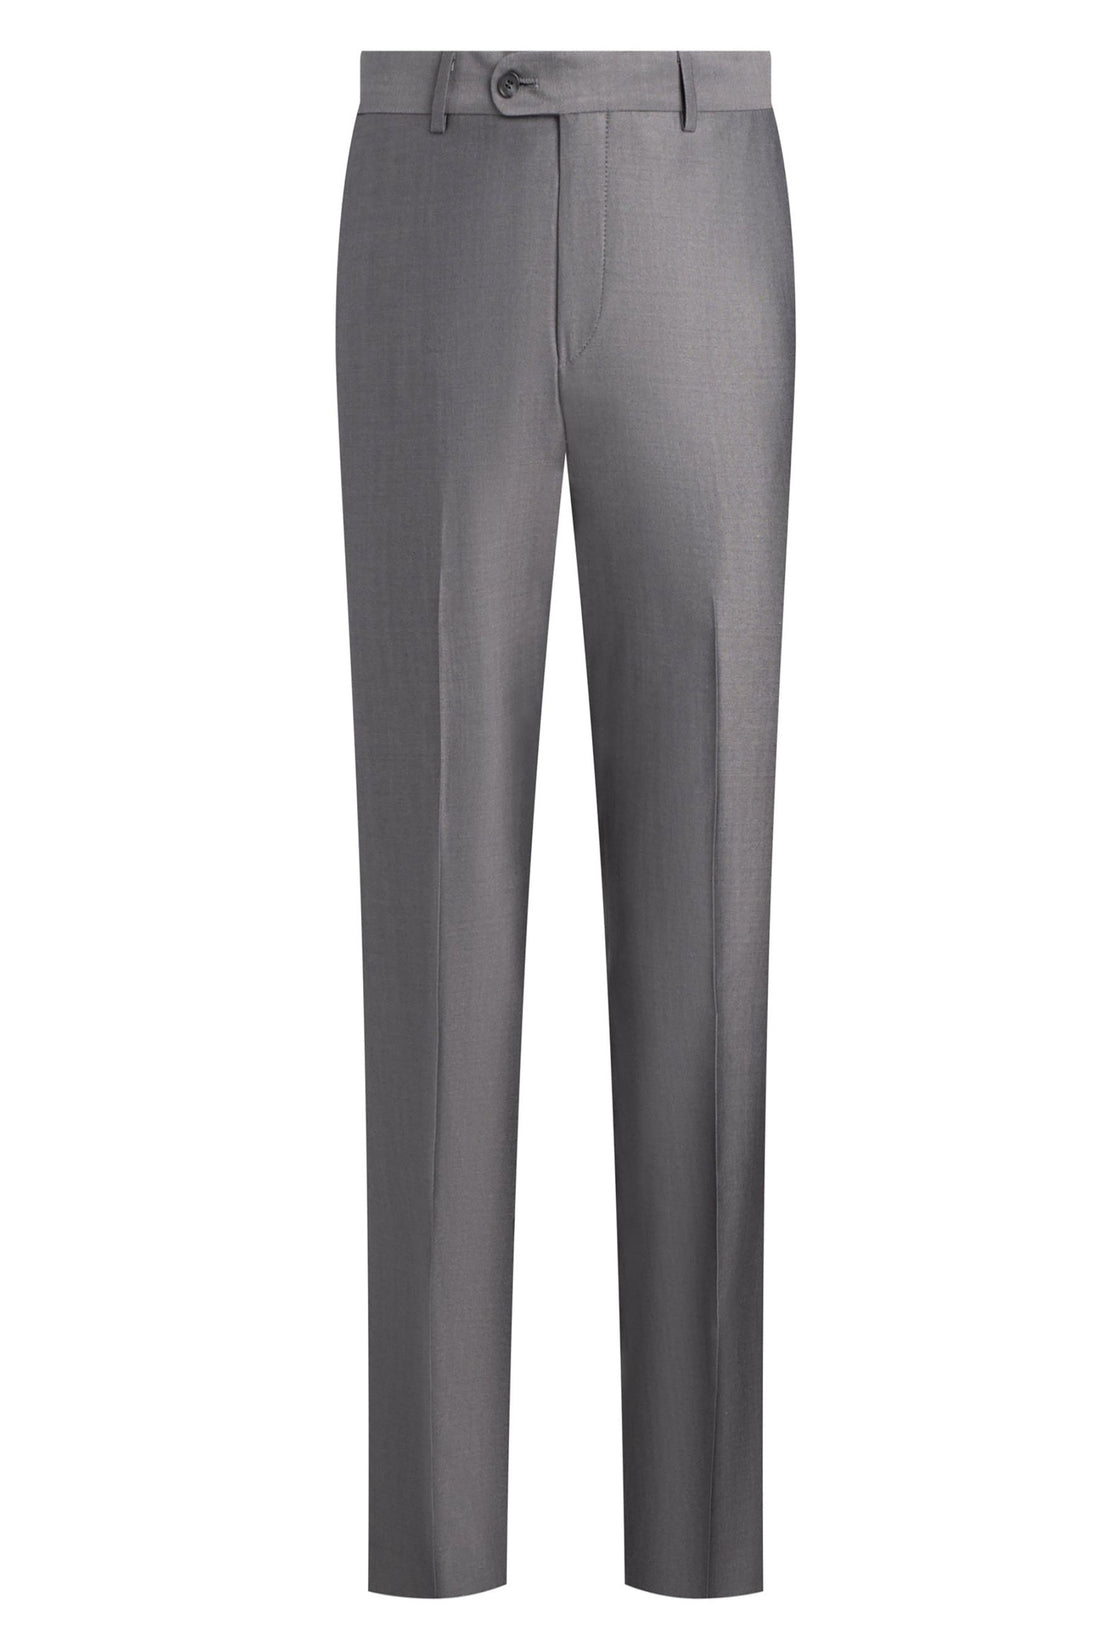 Grey Neat Flat Front Trousers